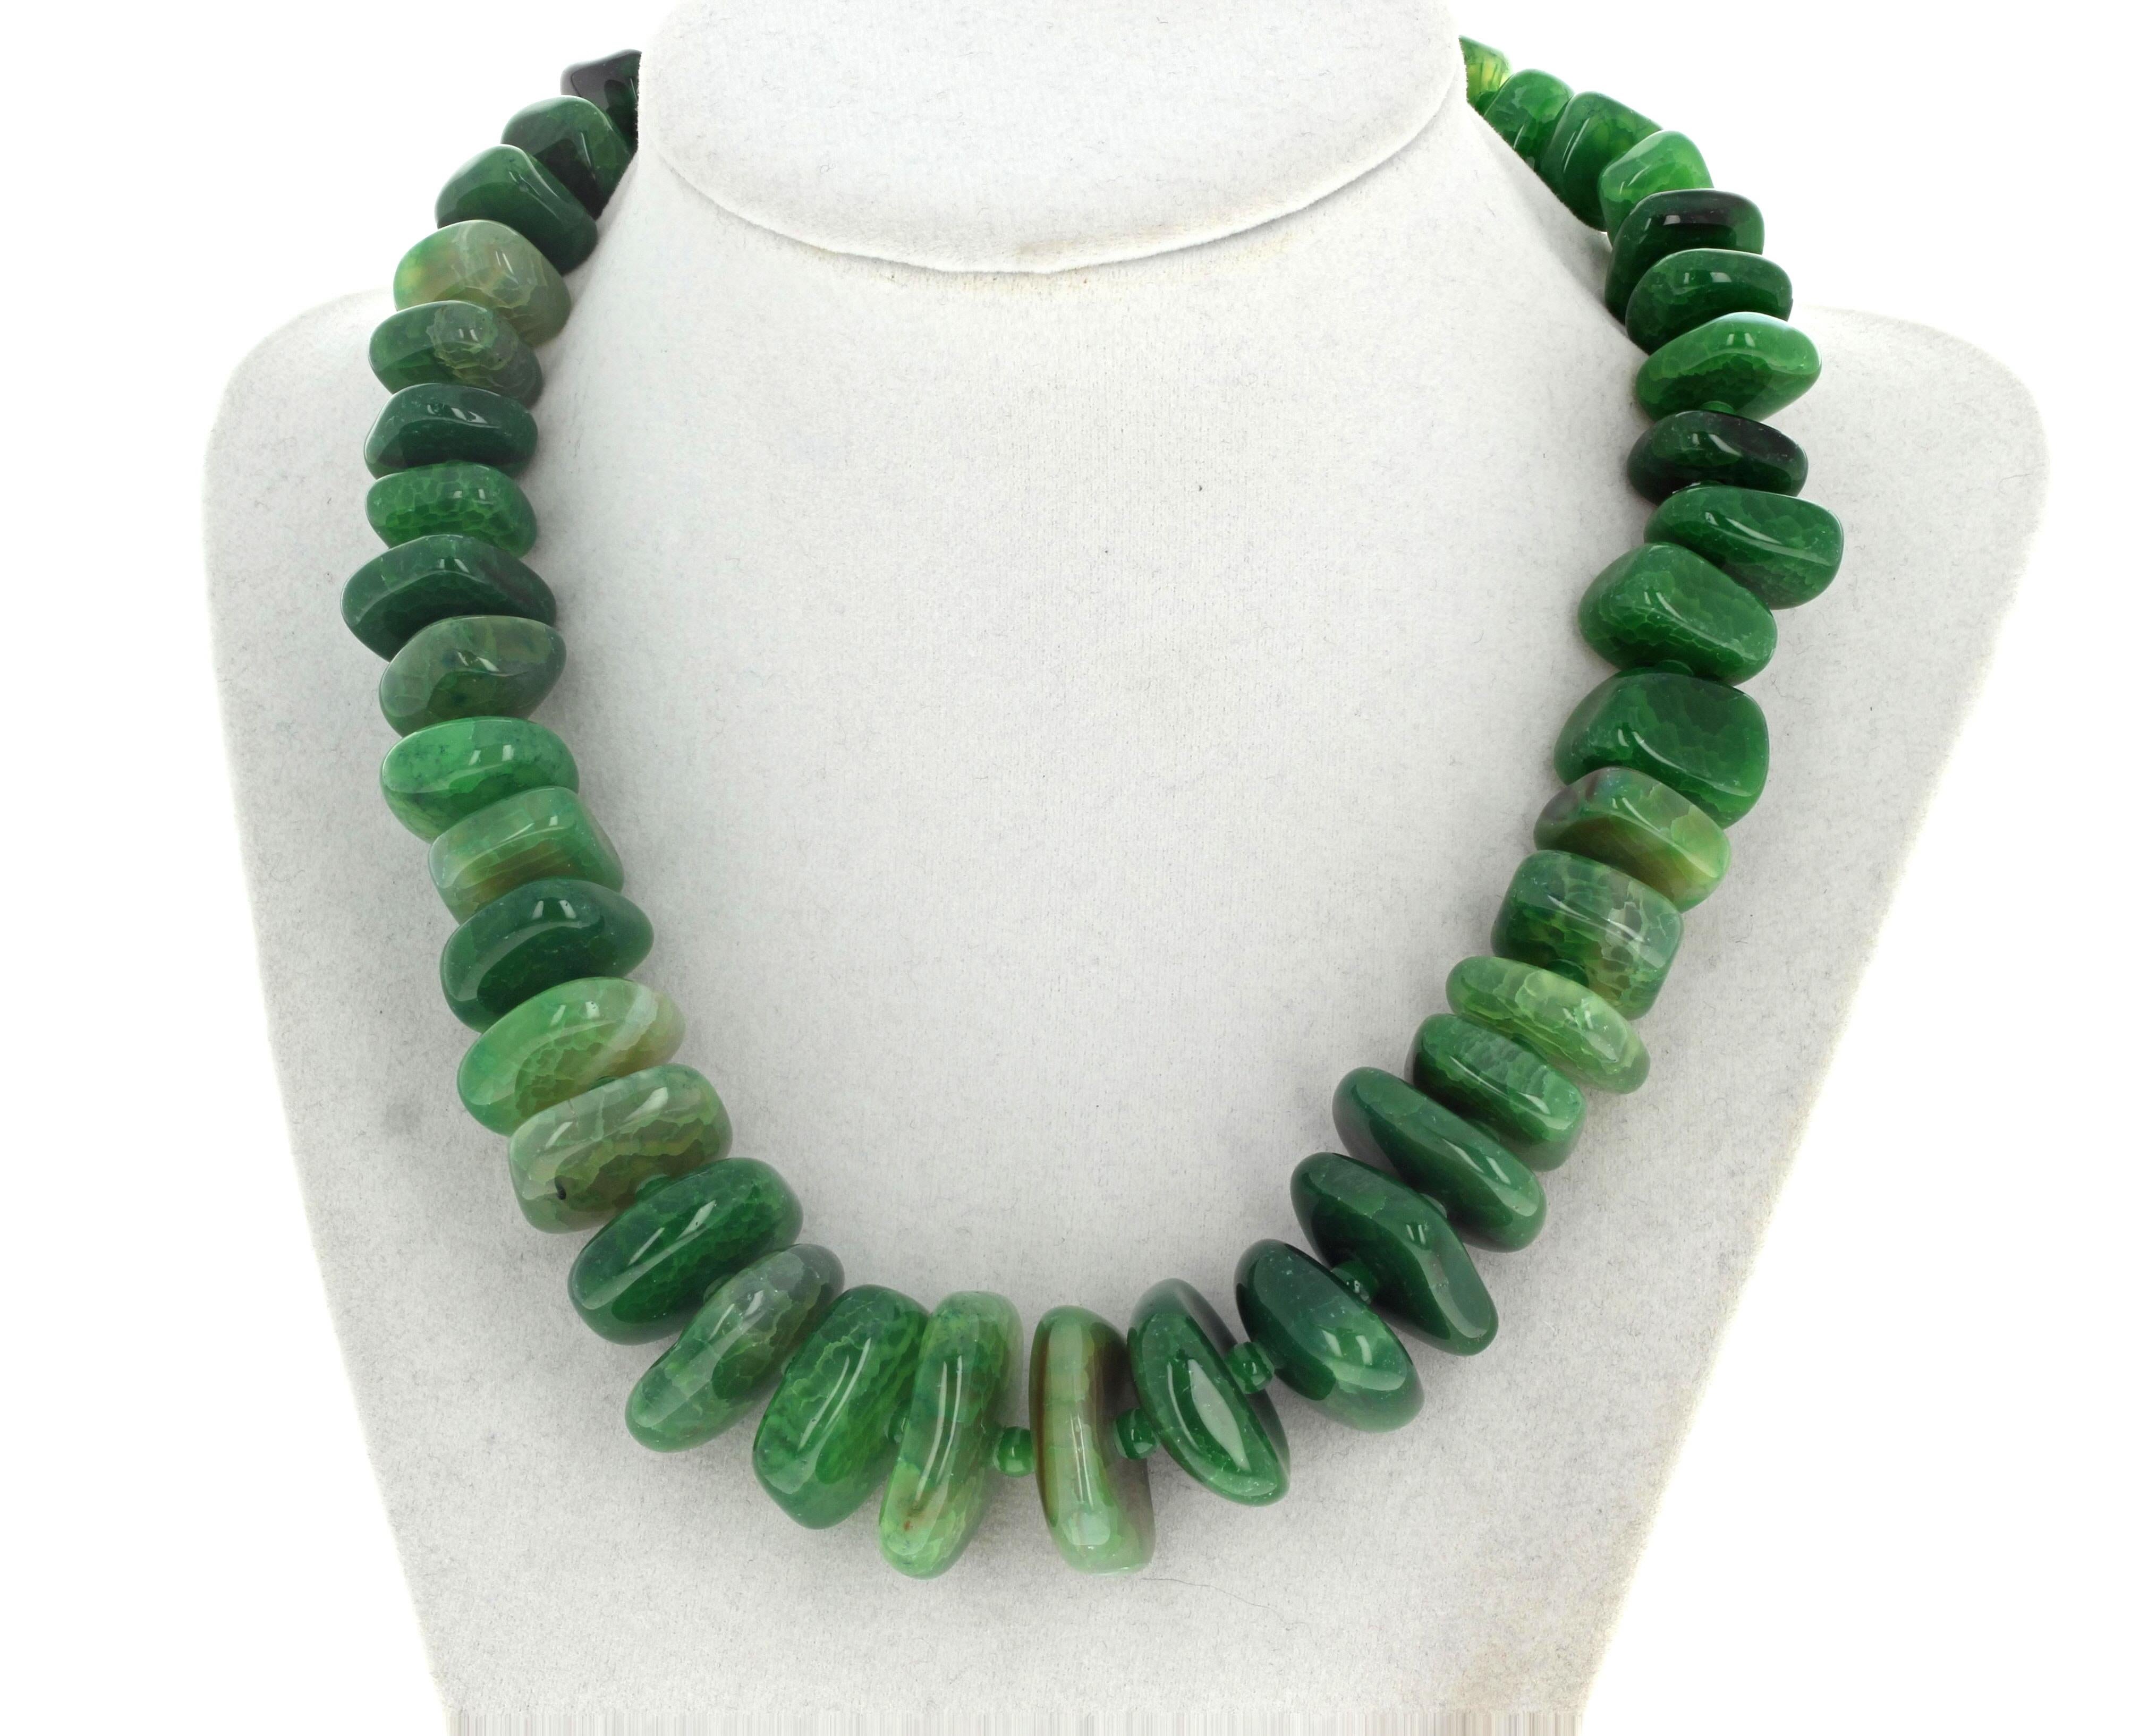 AJD Absolutely Beautiful Green Graduated Natural Irregular Agate Rondel Necklace For Sale 2